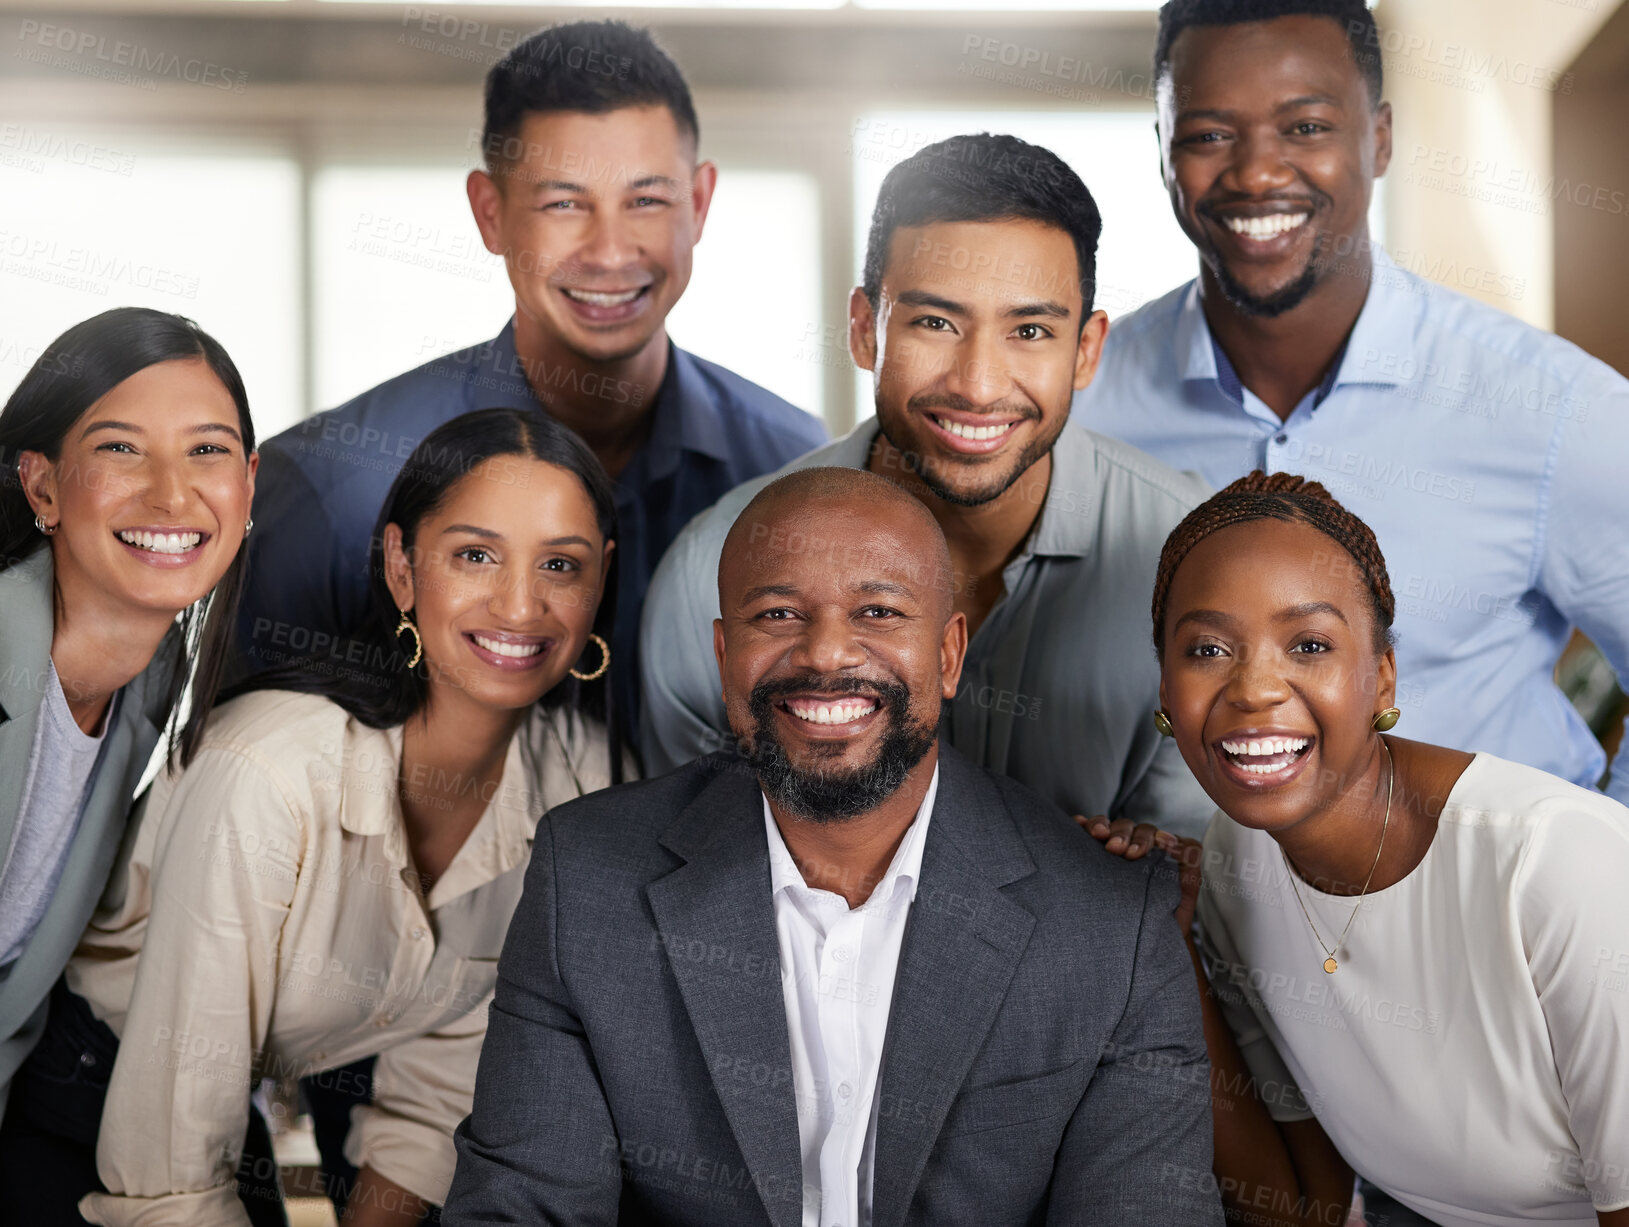 Buy stock photo Cropped portrait of a diverse group of businesspeople posing in their office